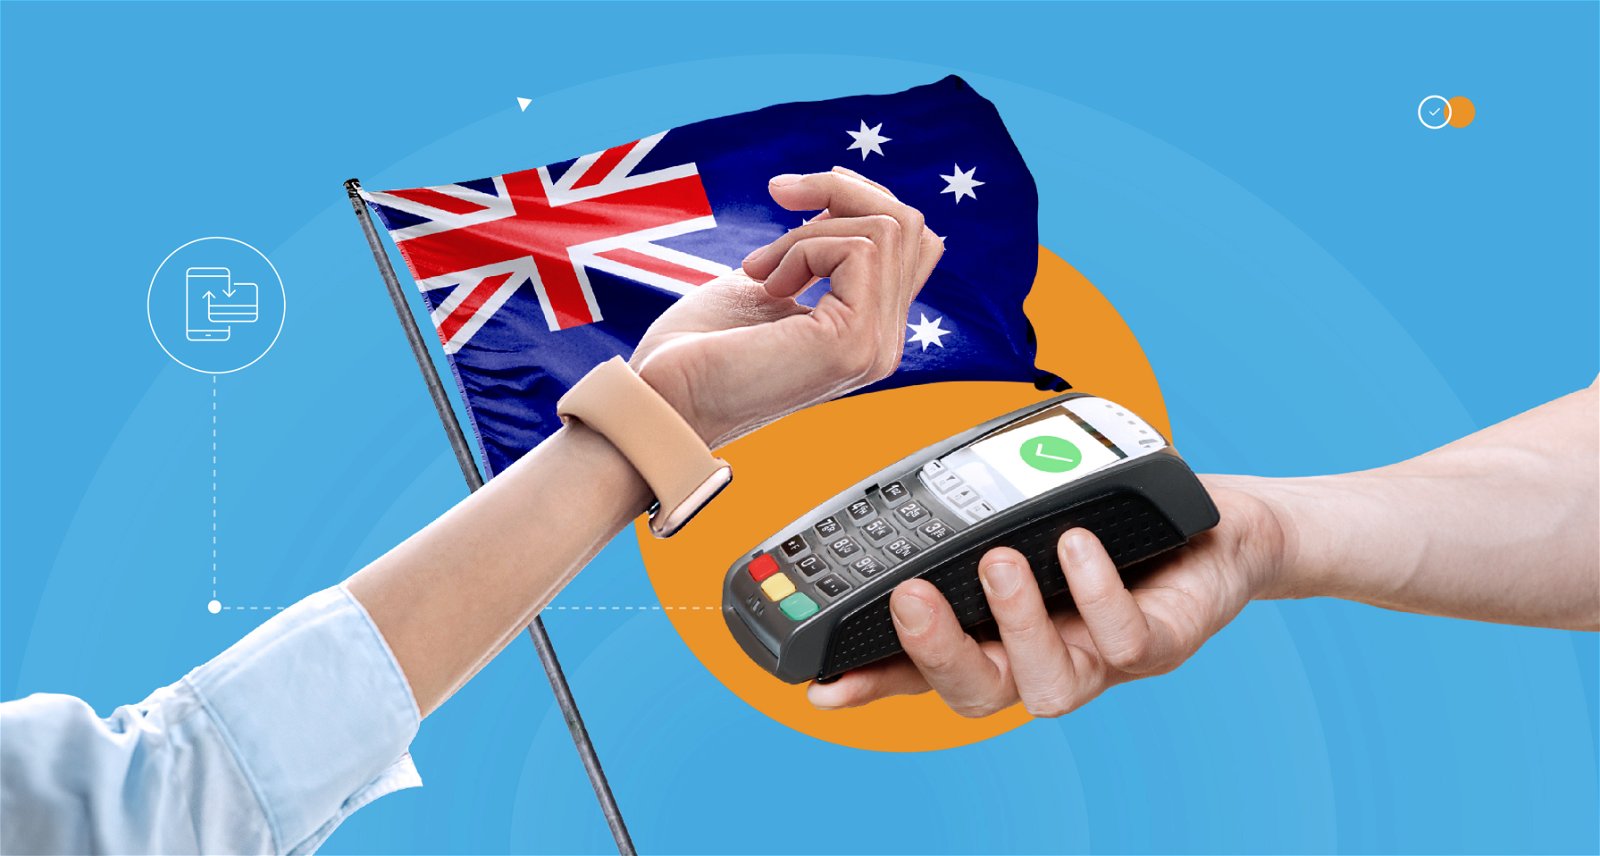 Disrupting the Contactless Payments Market in Australia